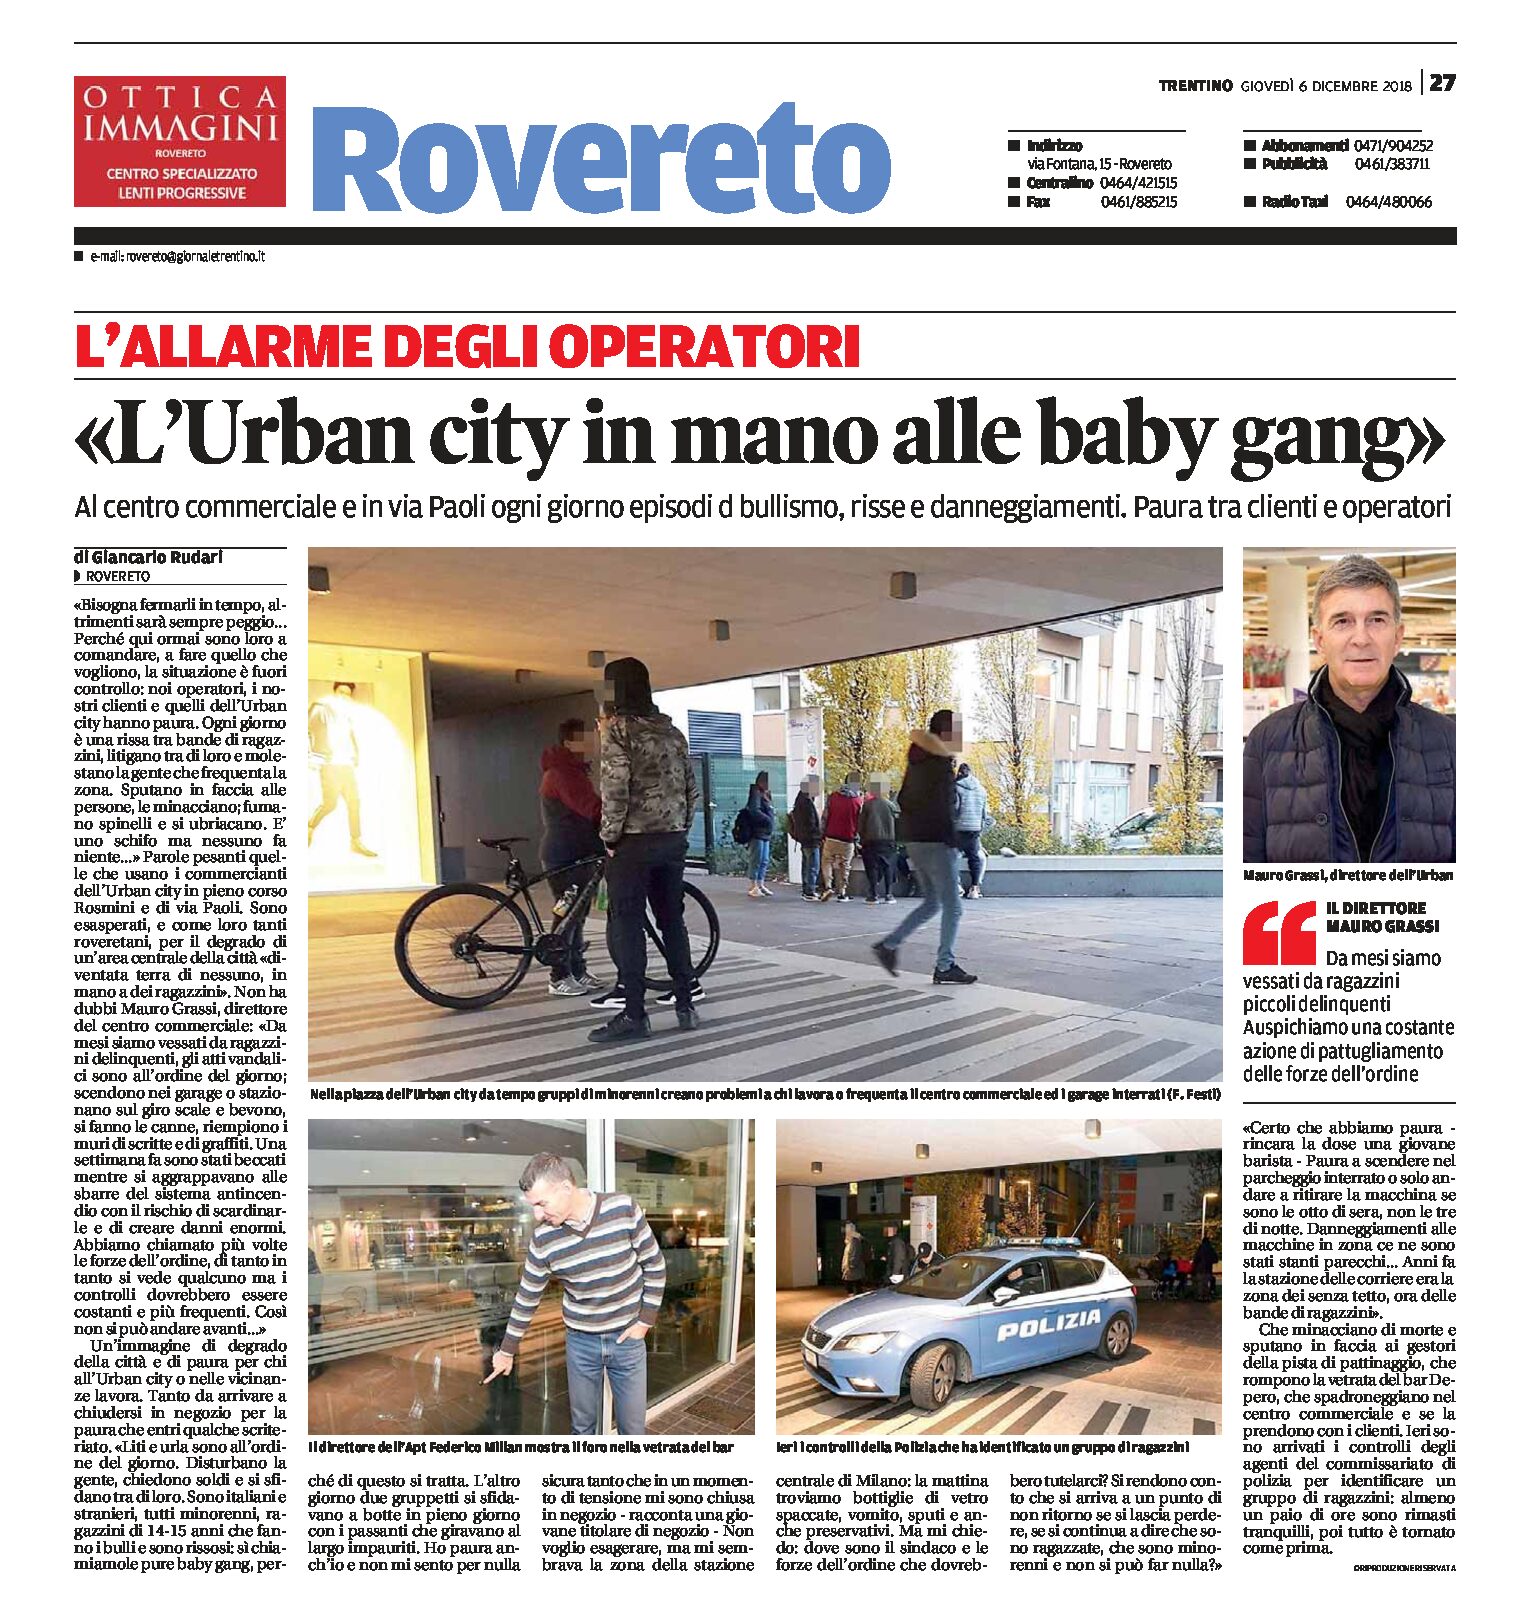 Rovereto: Urban city in mano alle baby gang